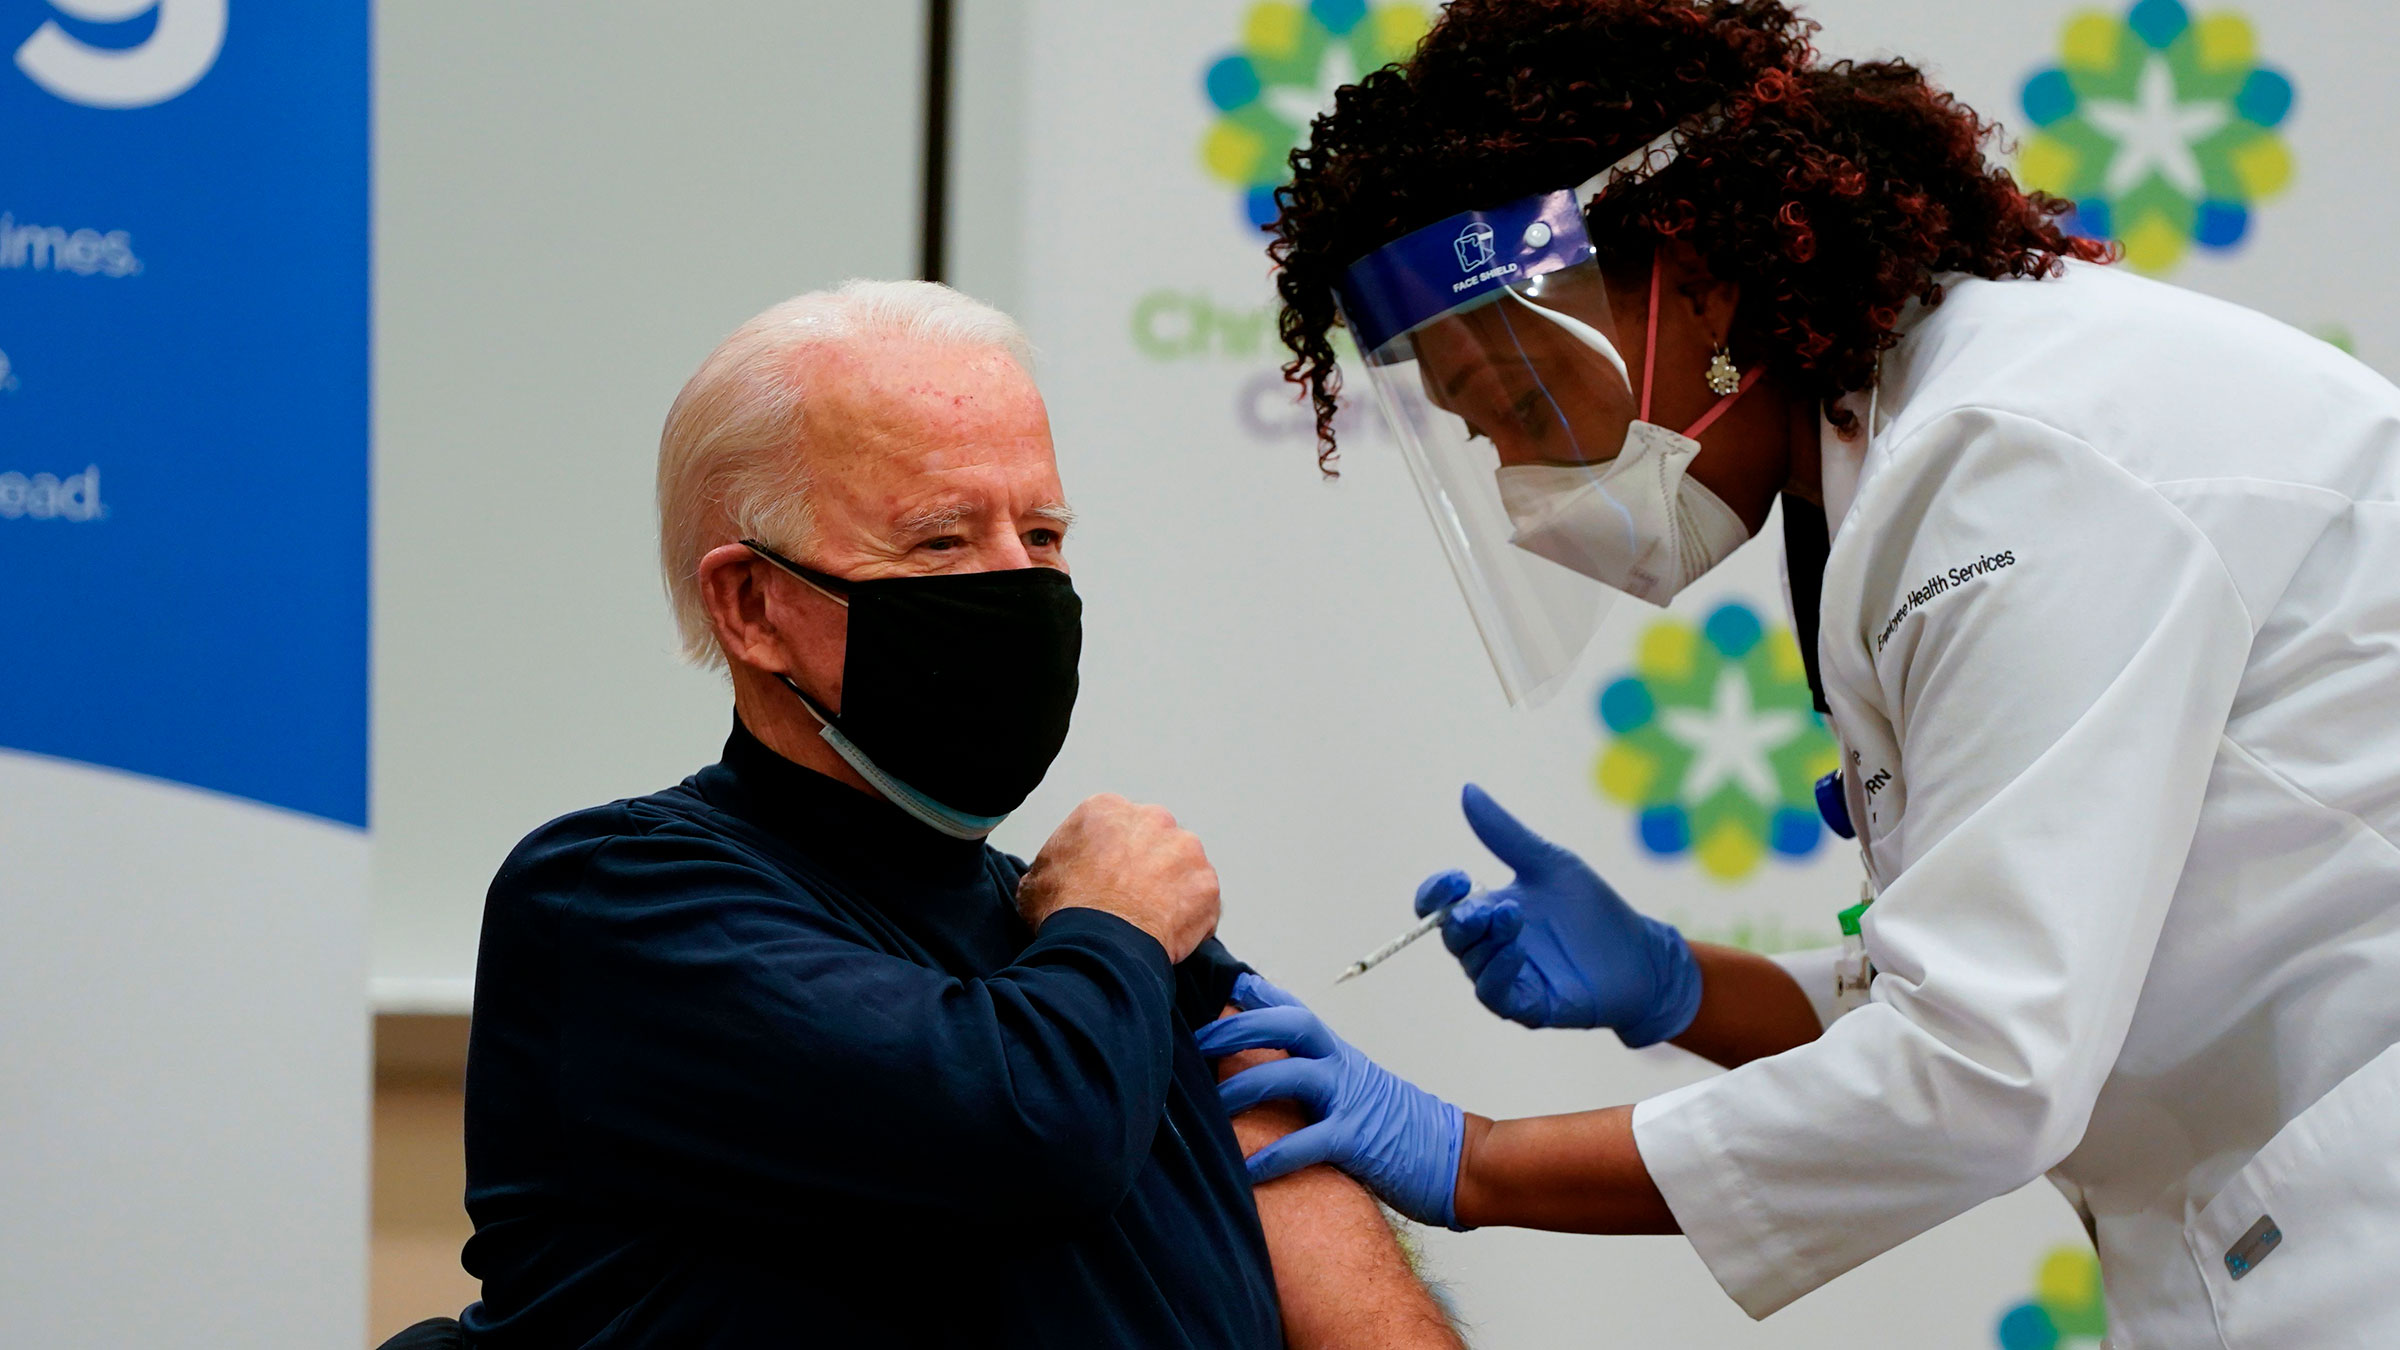 President-elect Joe Biden receives a Covid-19 vaccination at the Christiana Care campus in Newark, Delaware, on December 21.